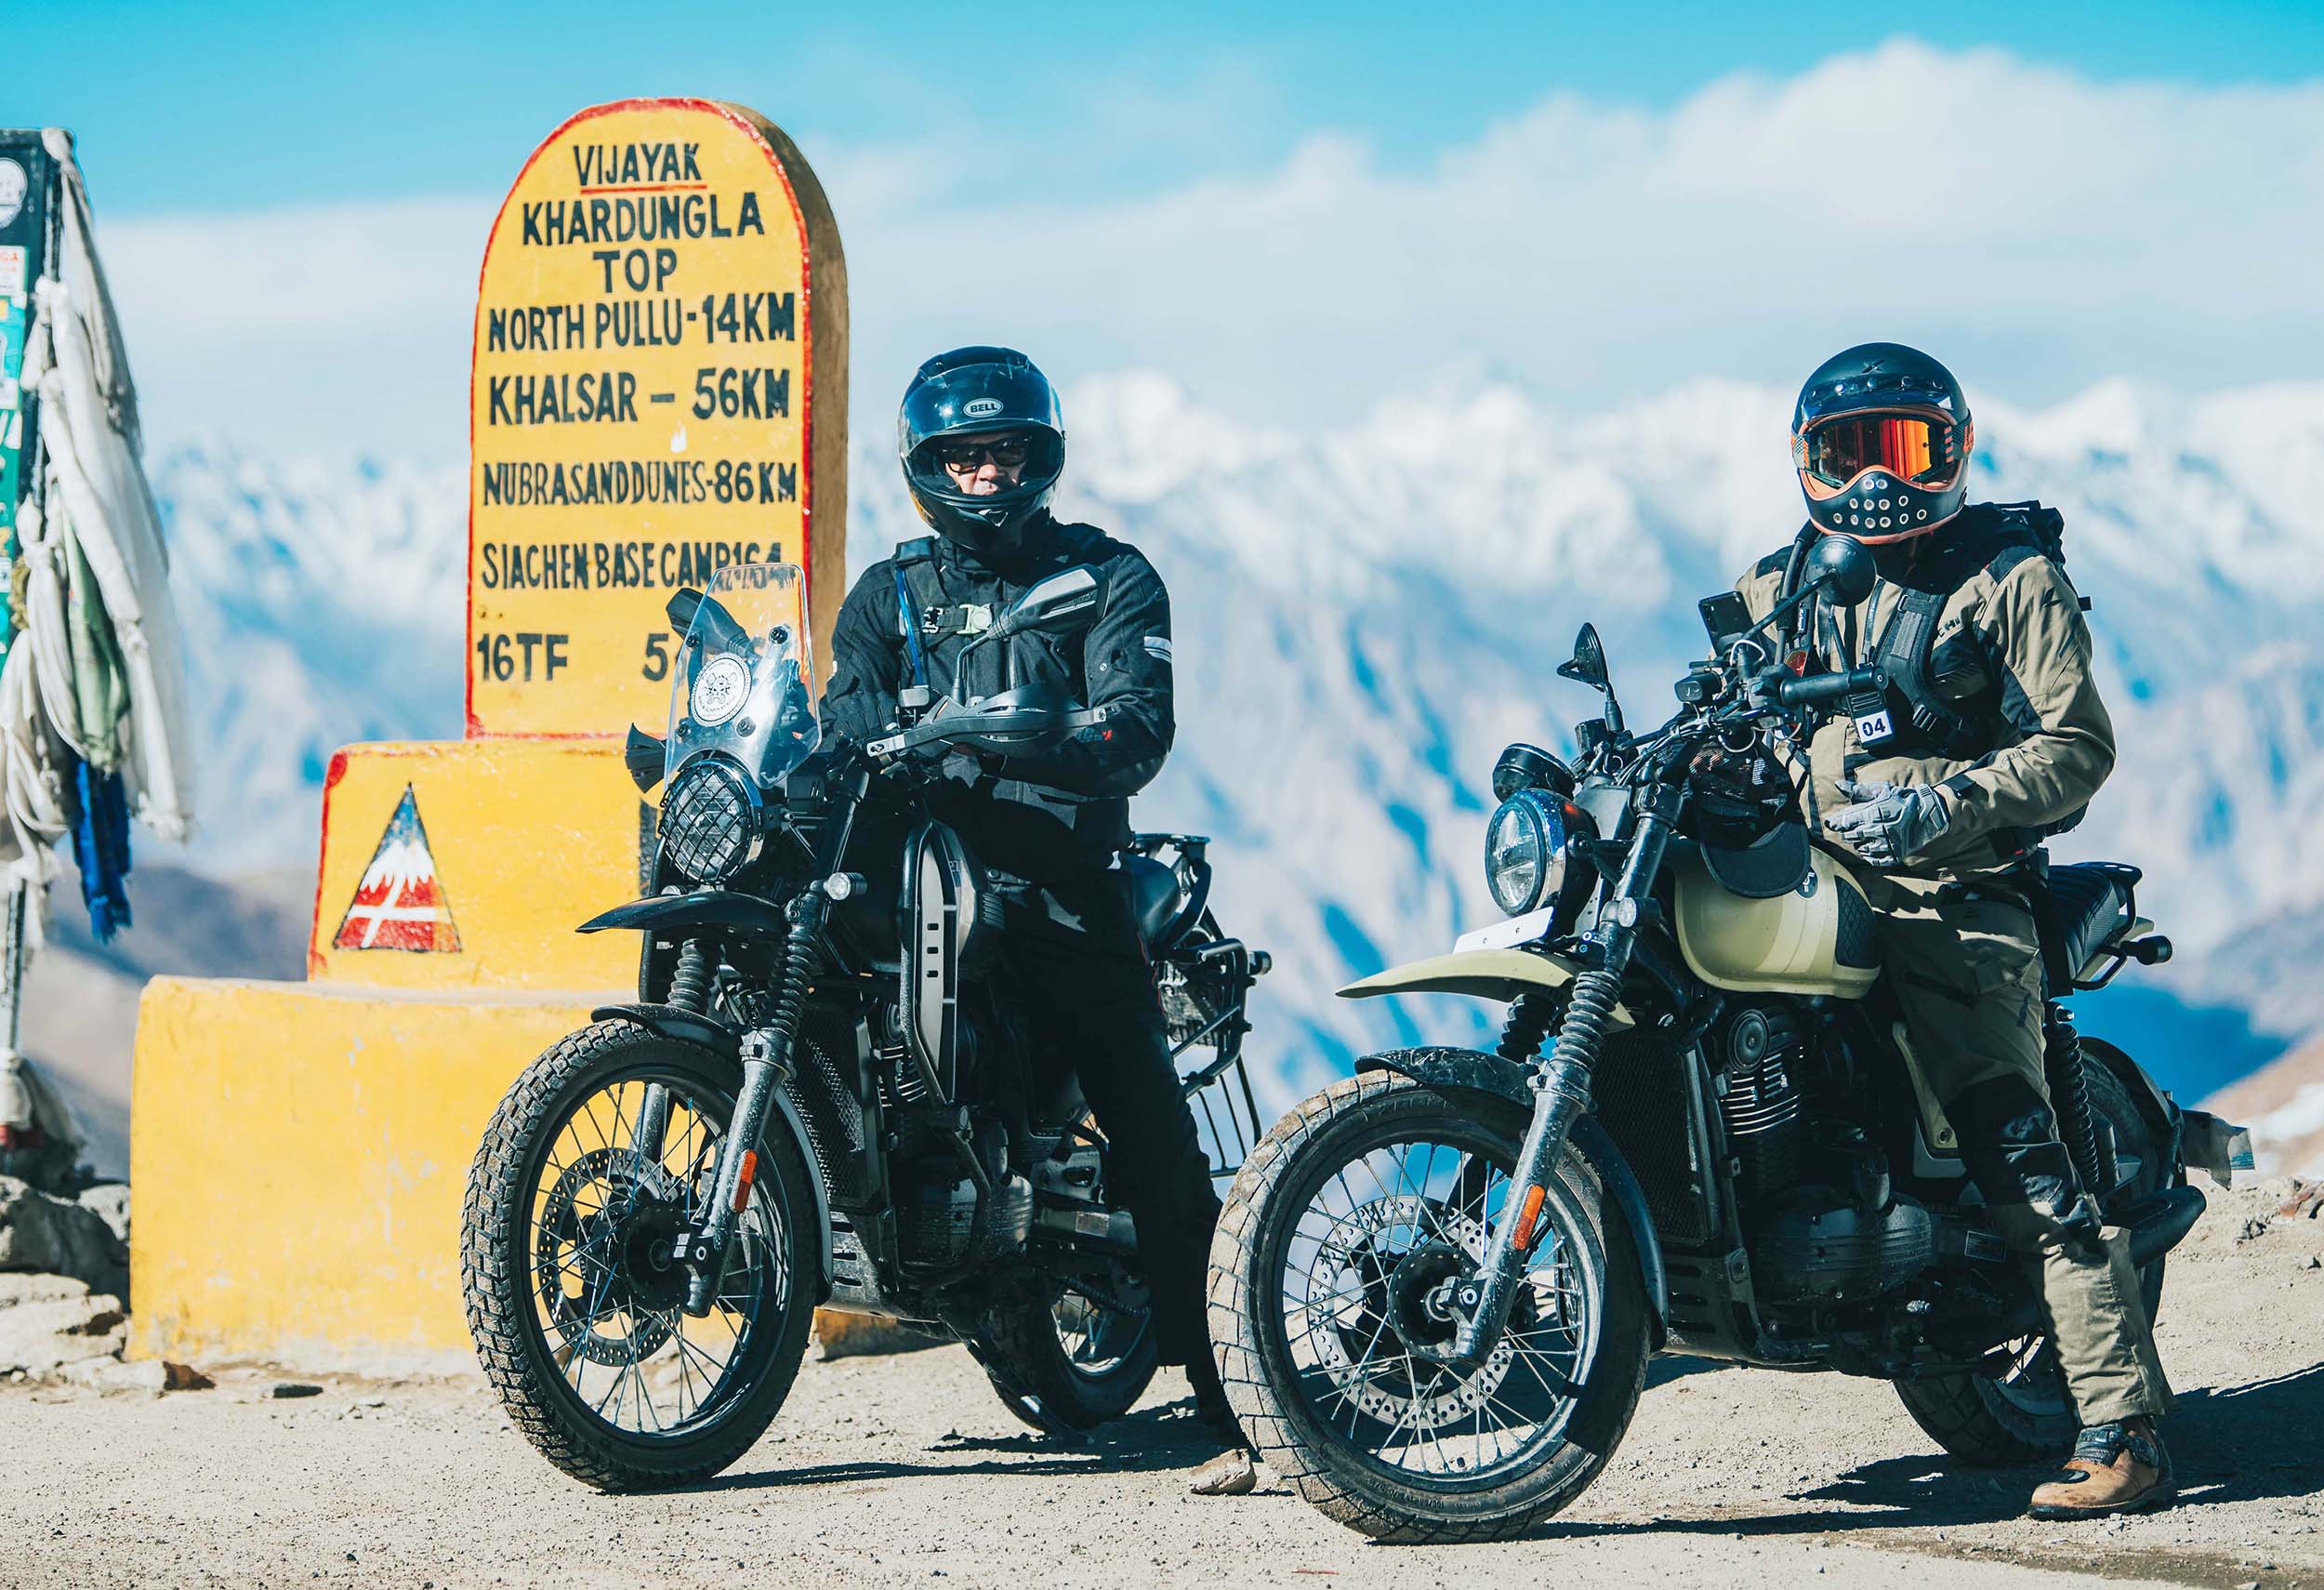 Java-Yazdi Motorcycles Announces 'Service Is On Us' Initiative on Ladakh Route